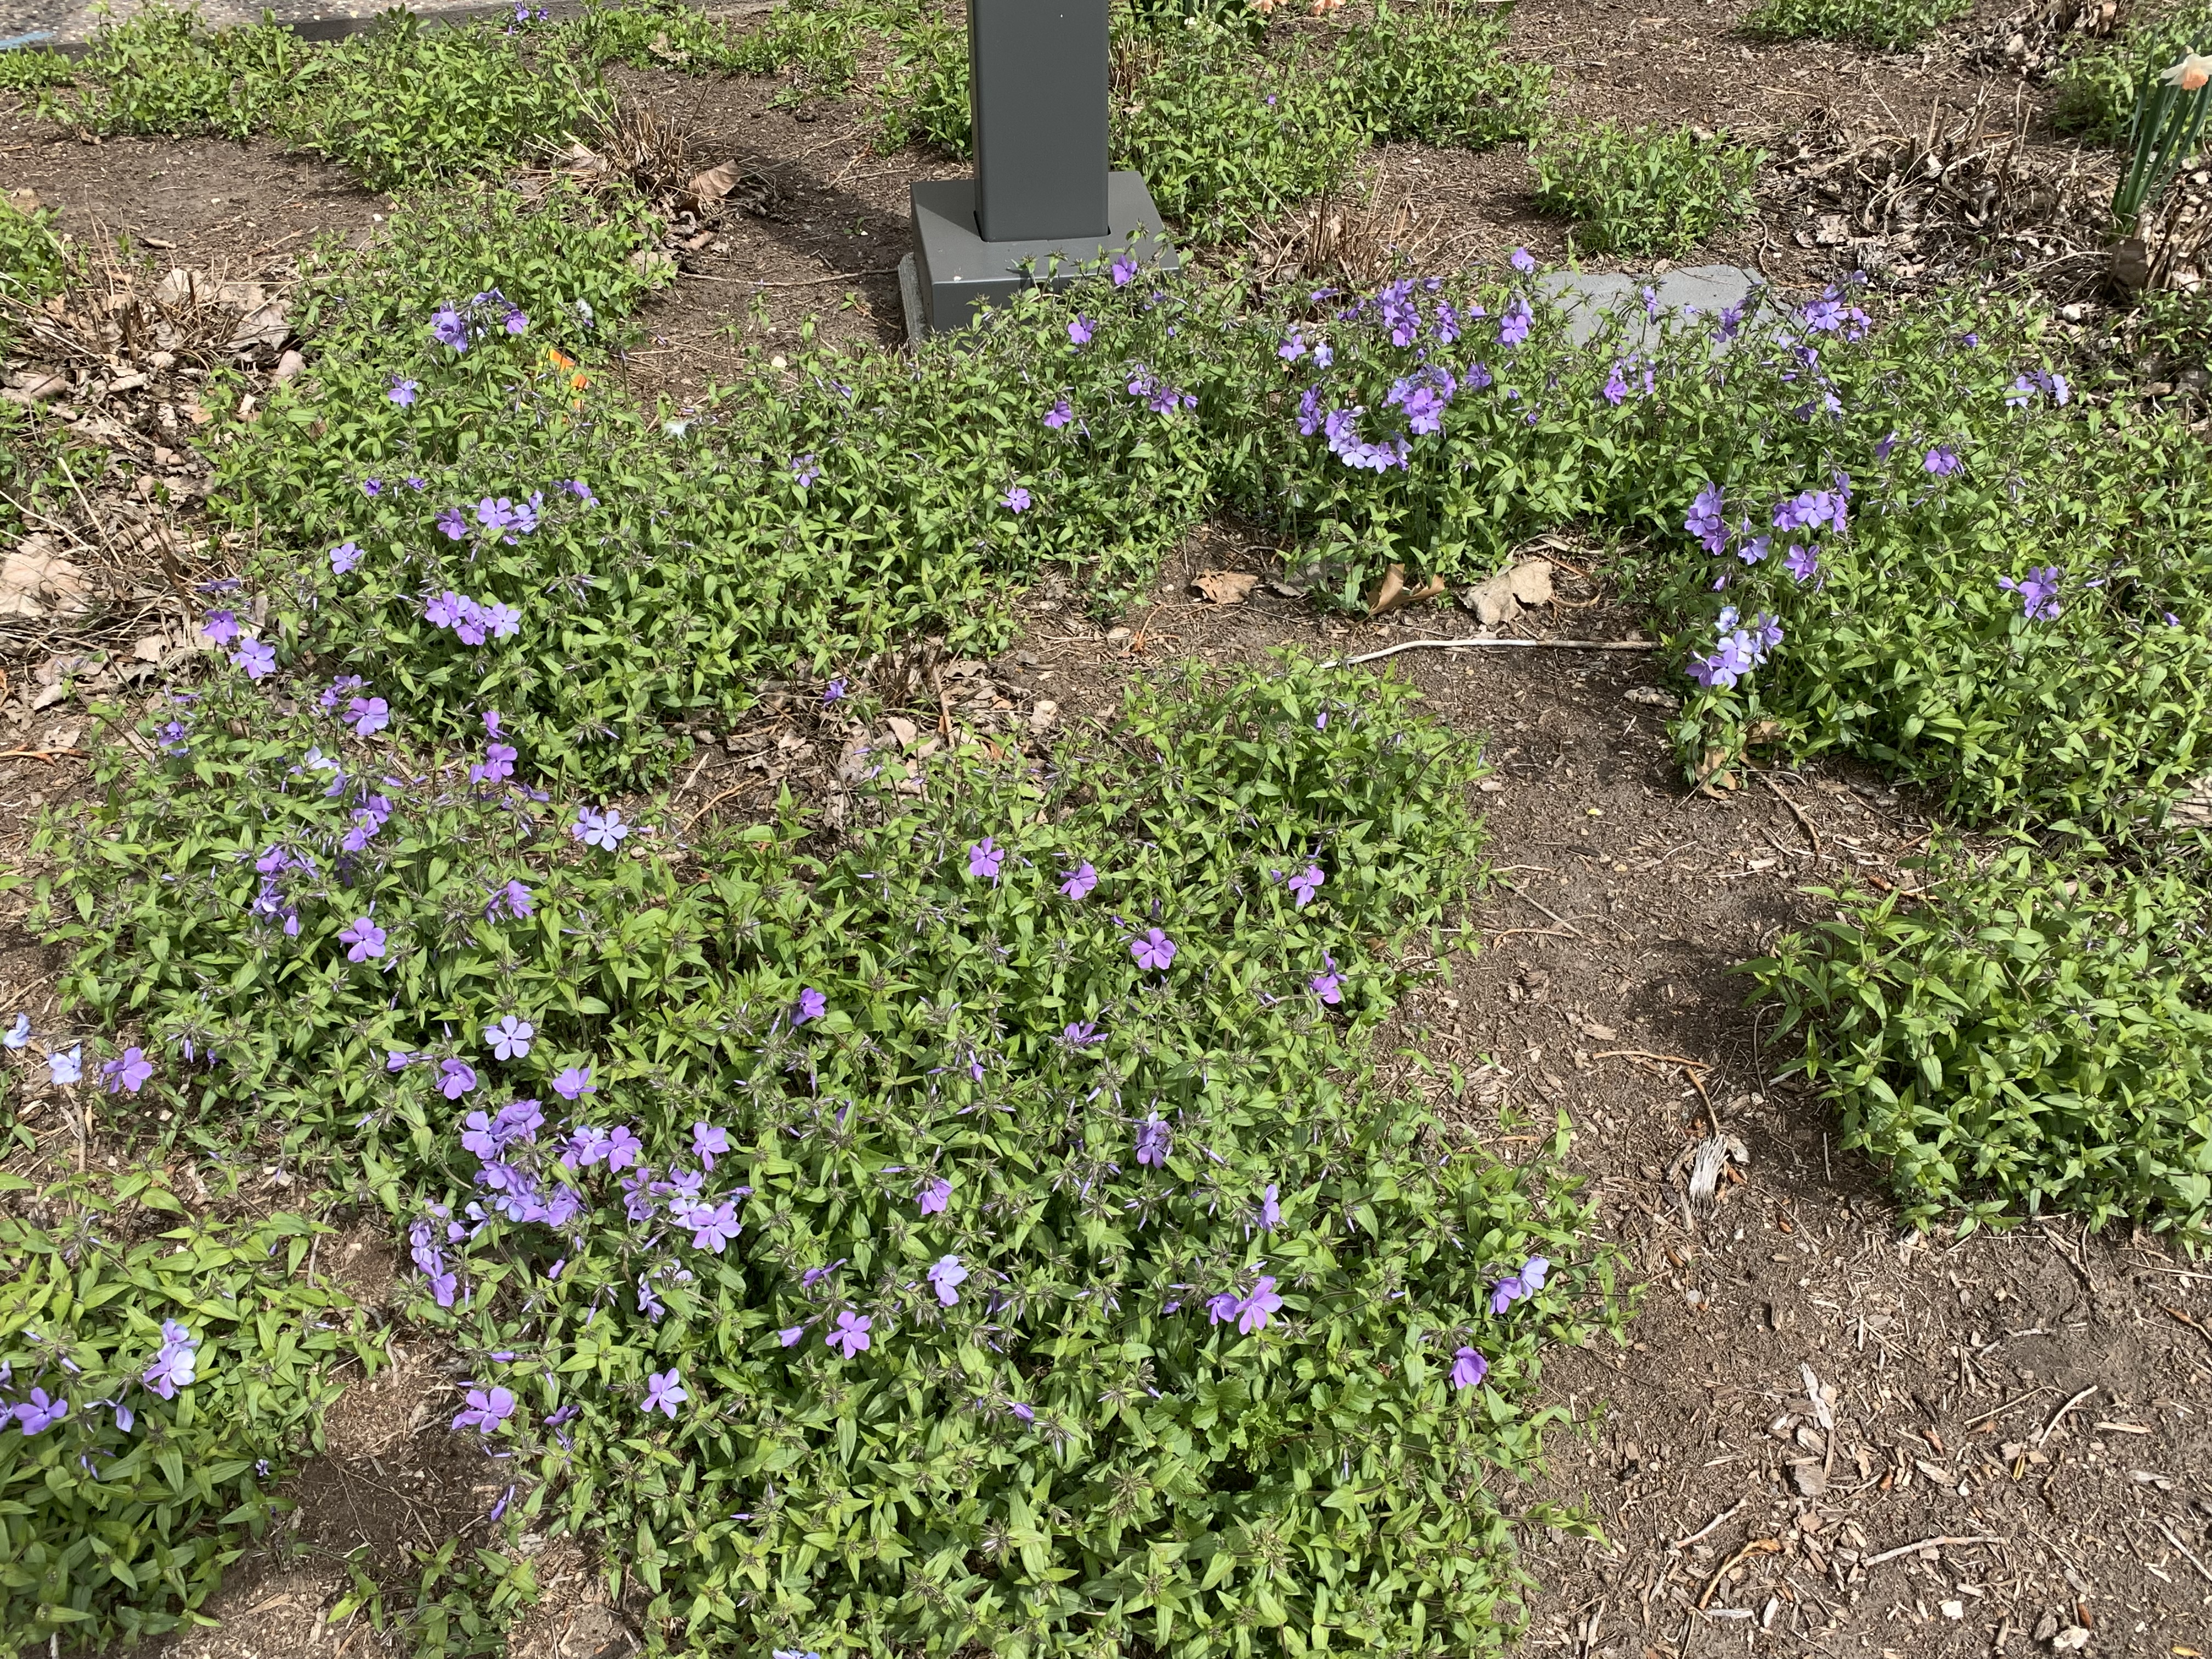 Low green bushes covered with pale purple flowers